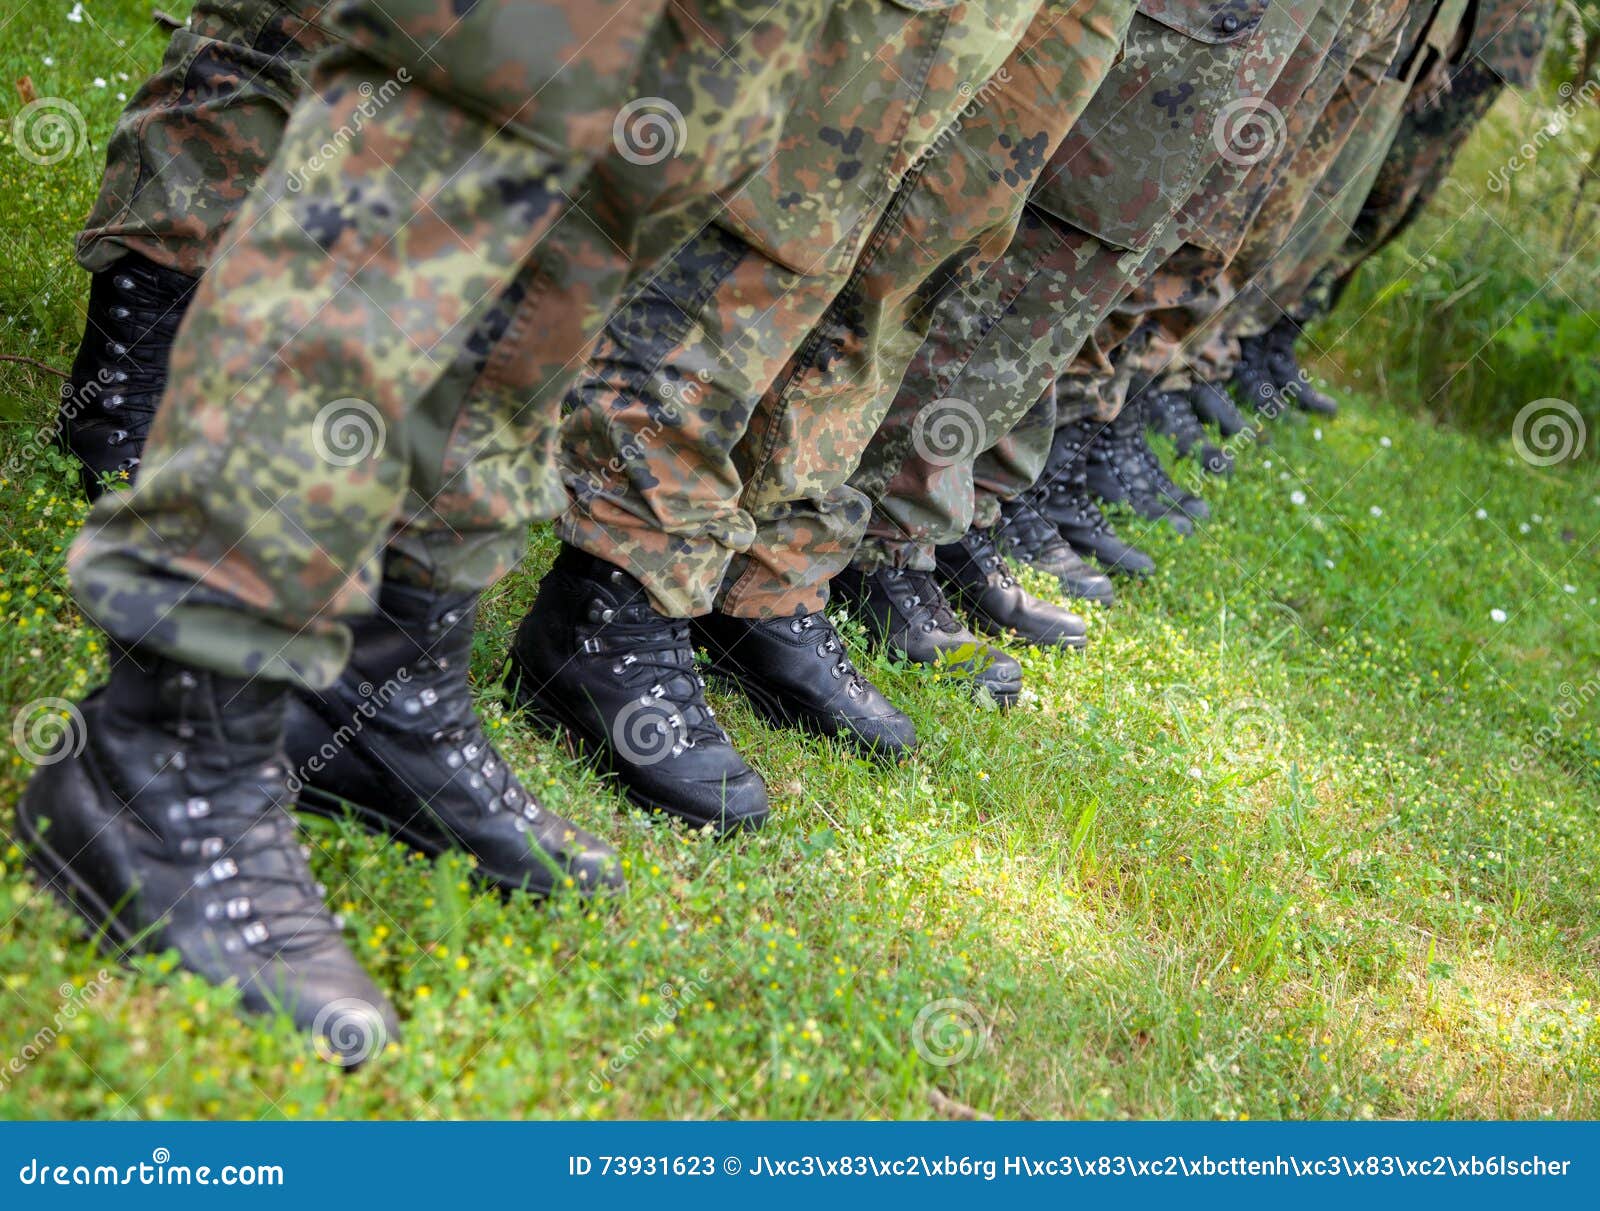 Boots from german soldiers stock image. Image of order - 73931623